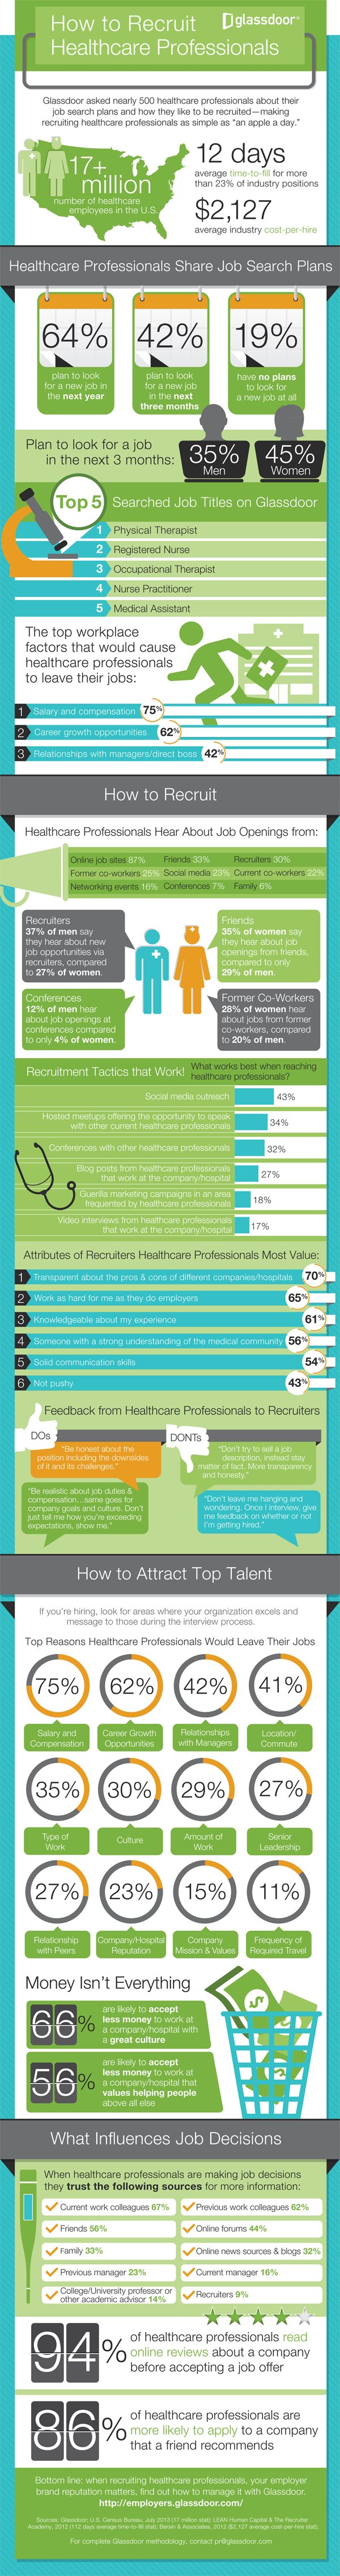 GD_Healthcare_Infographic